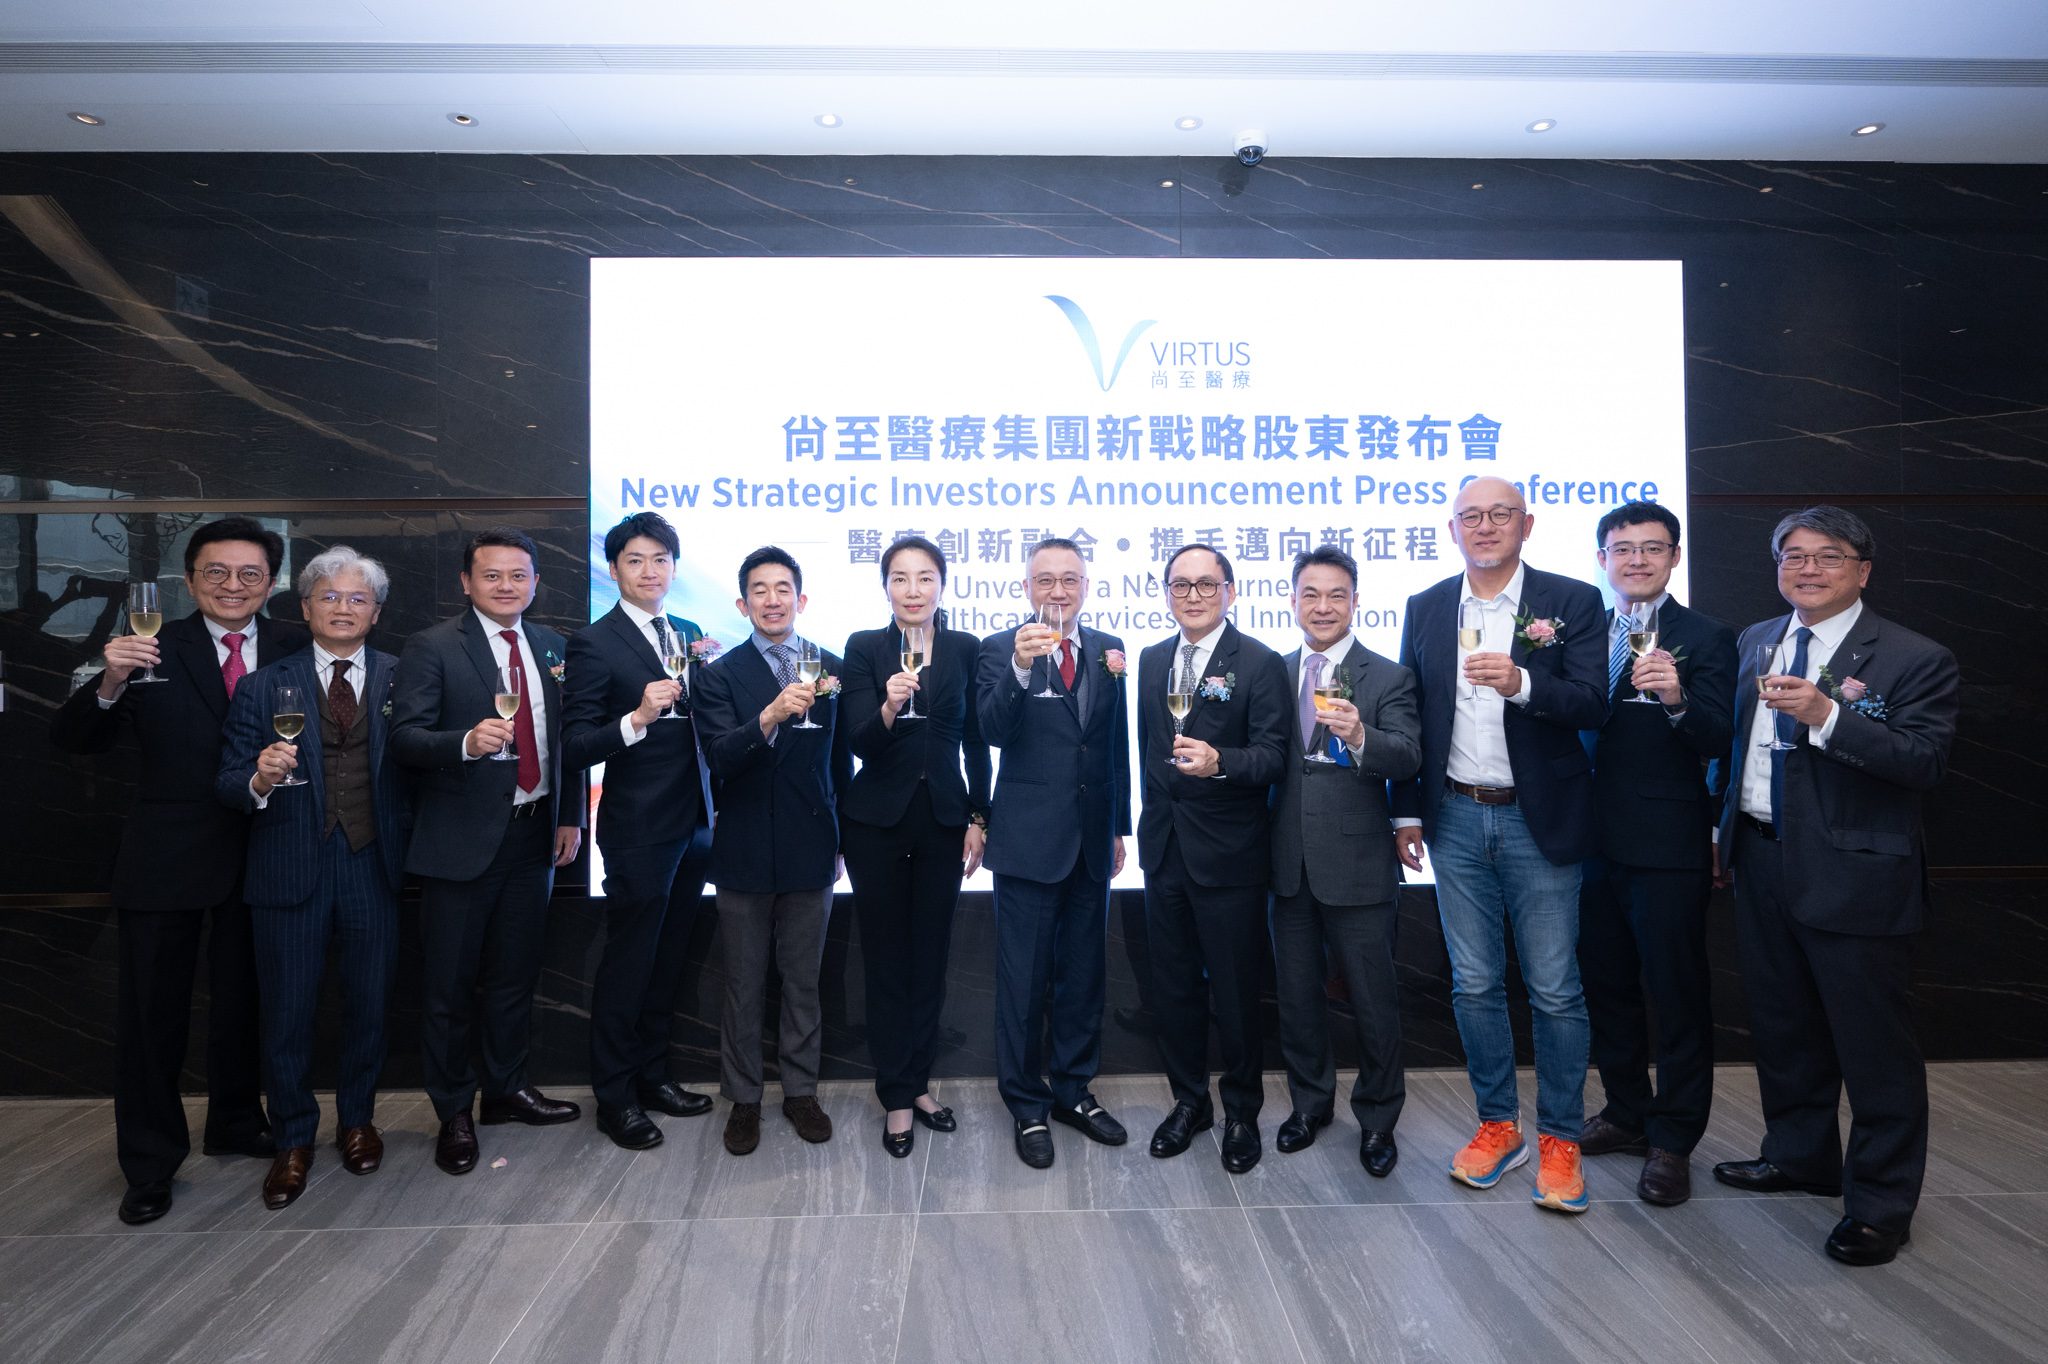 GIC-backed HK medical group Virtus closes Series E round to fuel its GBA expansion